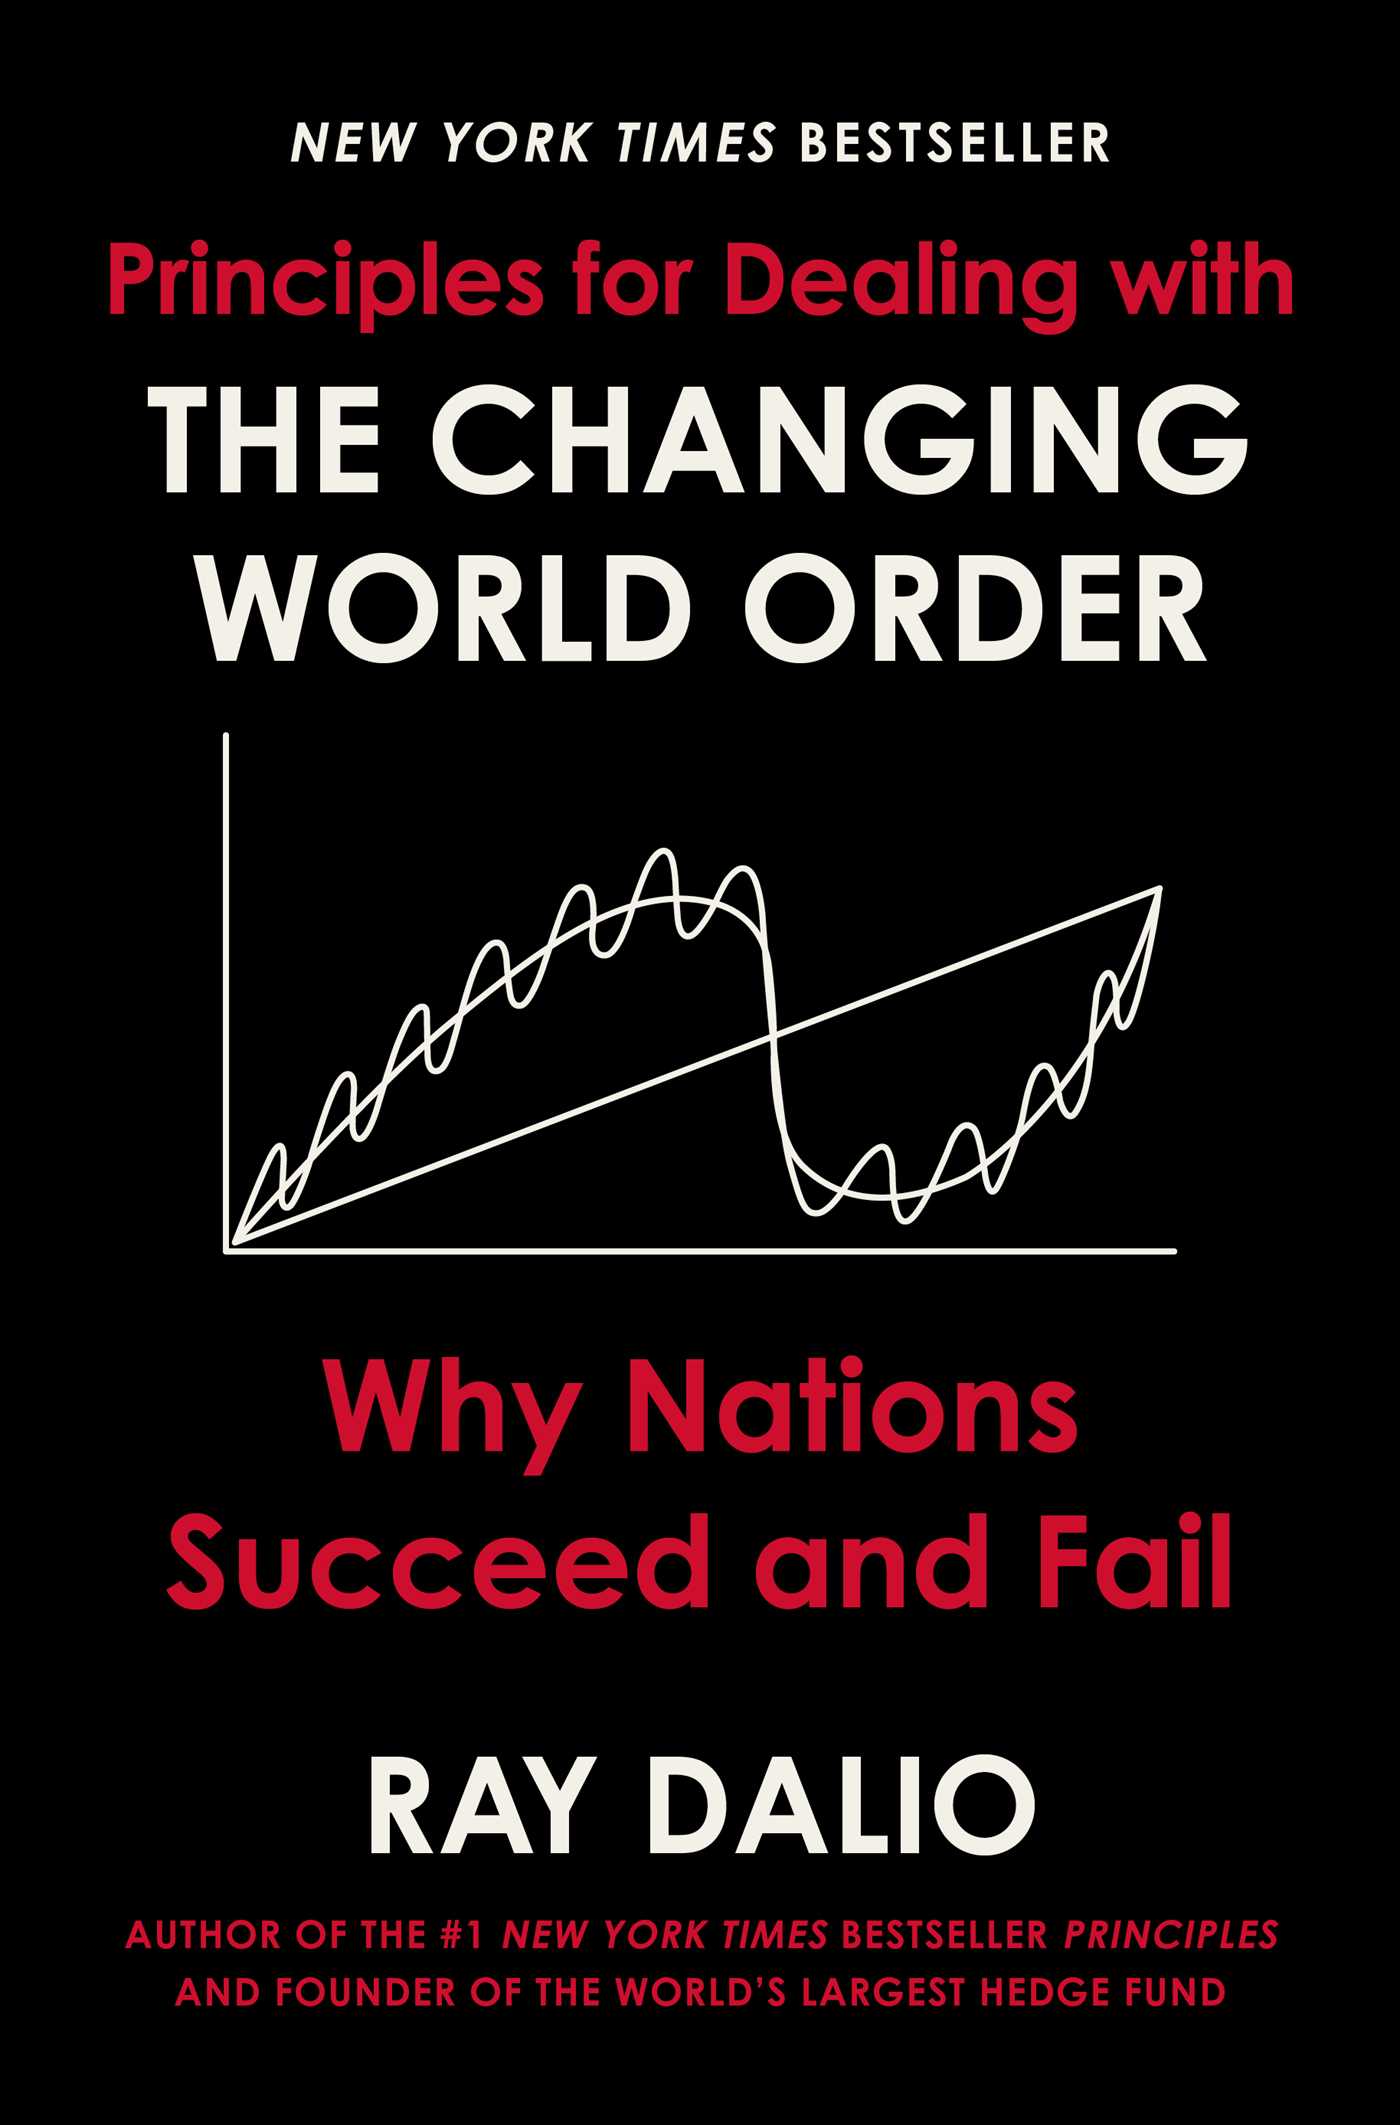 Principles for Dealing with the Changing World Order : Why Nations Succeed and Fail | Business & Management